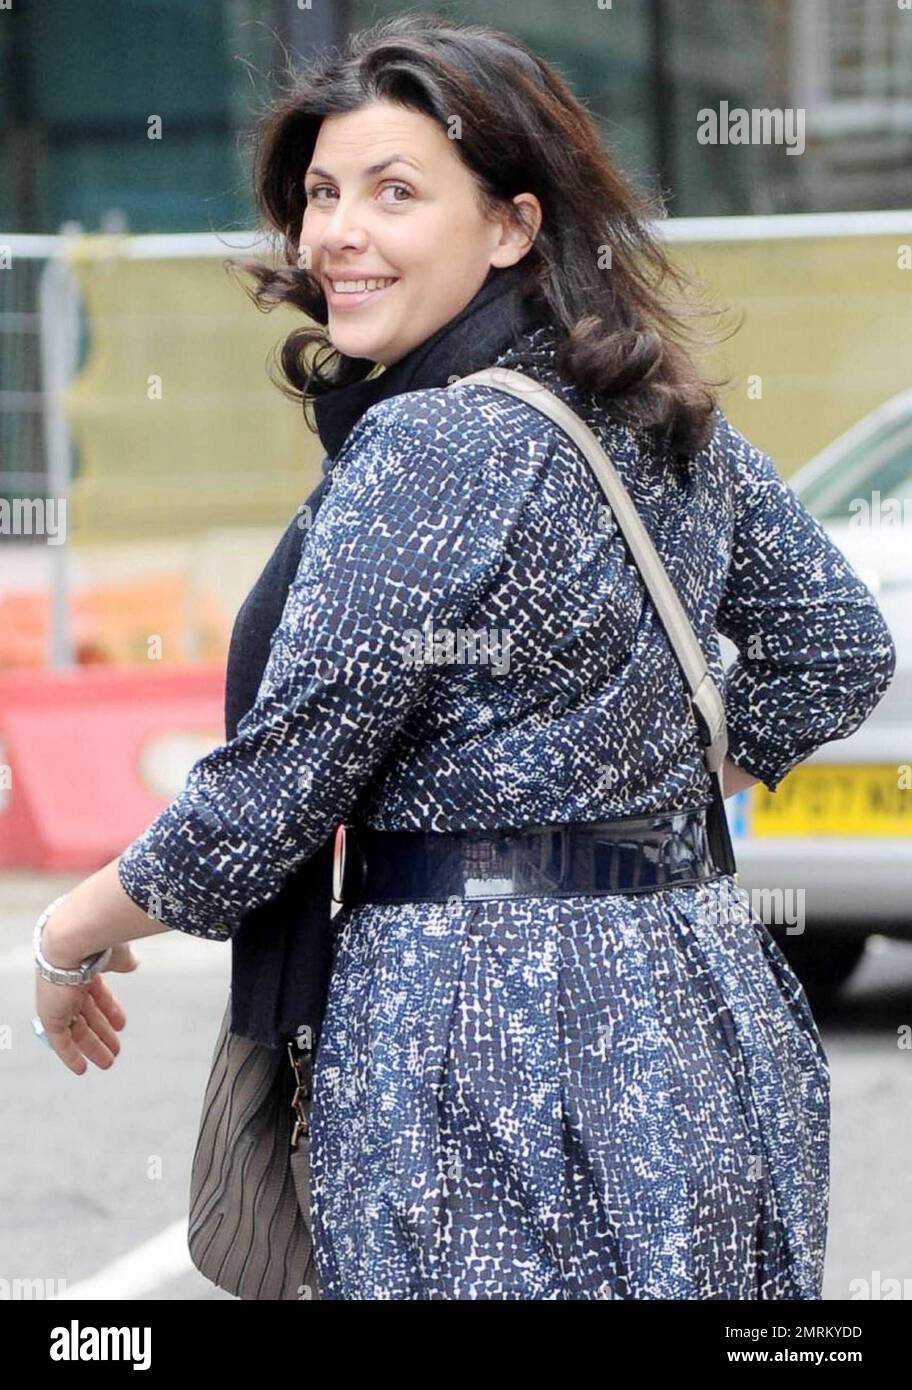 British TV presenter Kirstie Allsopp appears happy as she leaves BBC Radio studios a week after Lord Alan Sugar, British entrepreneur and star of the reality TV program "The Apprentice", called her a 'lying cow' on Twitter. London, UK. 10/28/10. Stock Photo